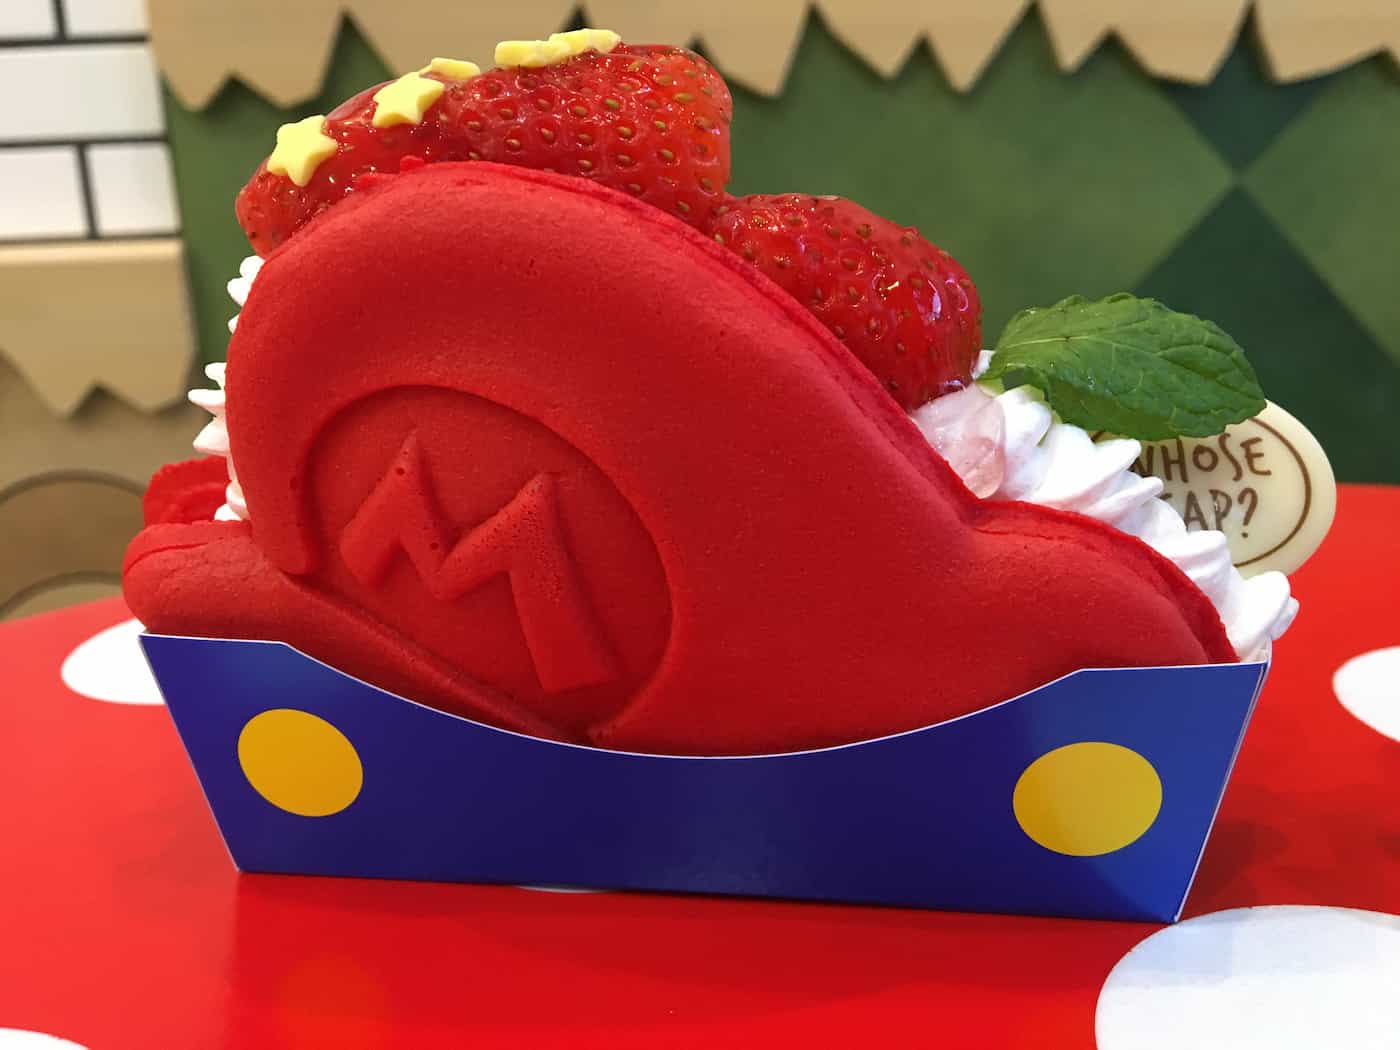 A delicious treat shaped like Mario's hat, topped with whipped cream and strawberries.